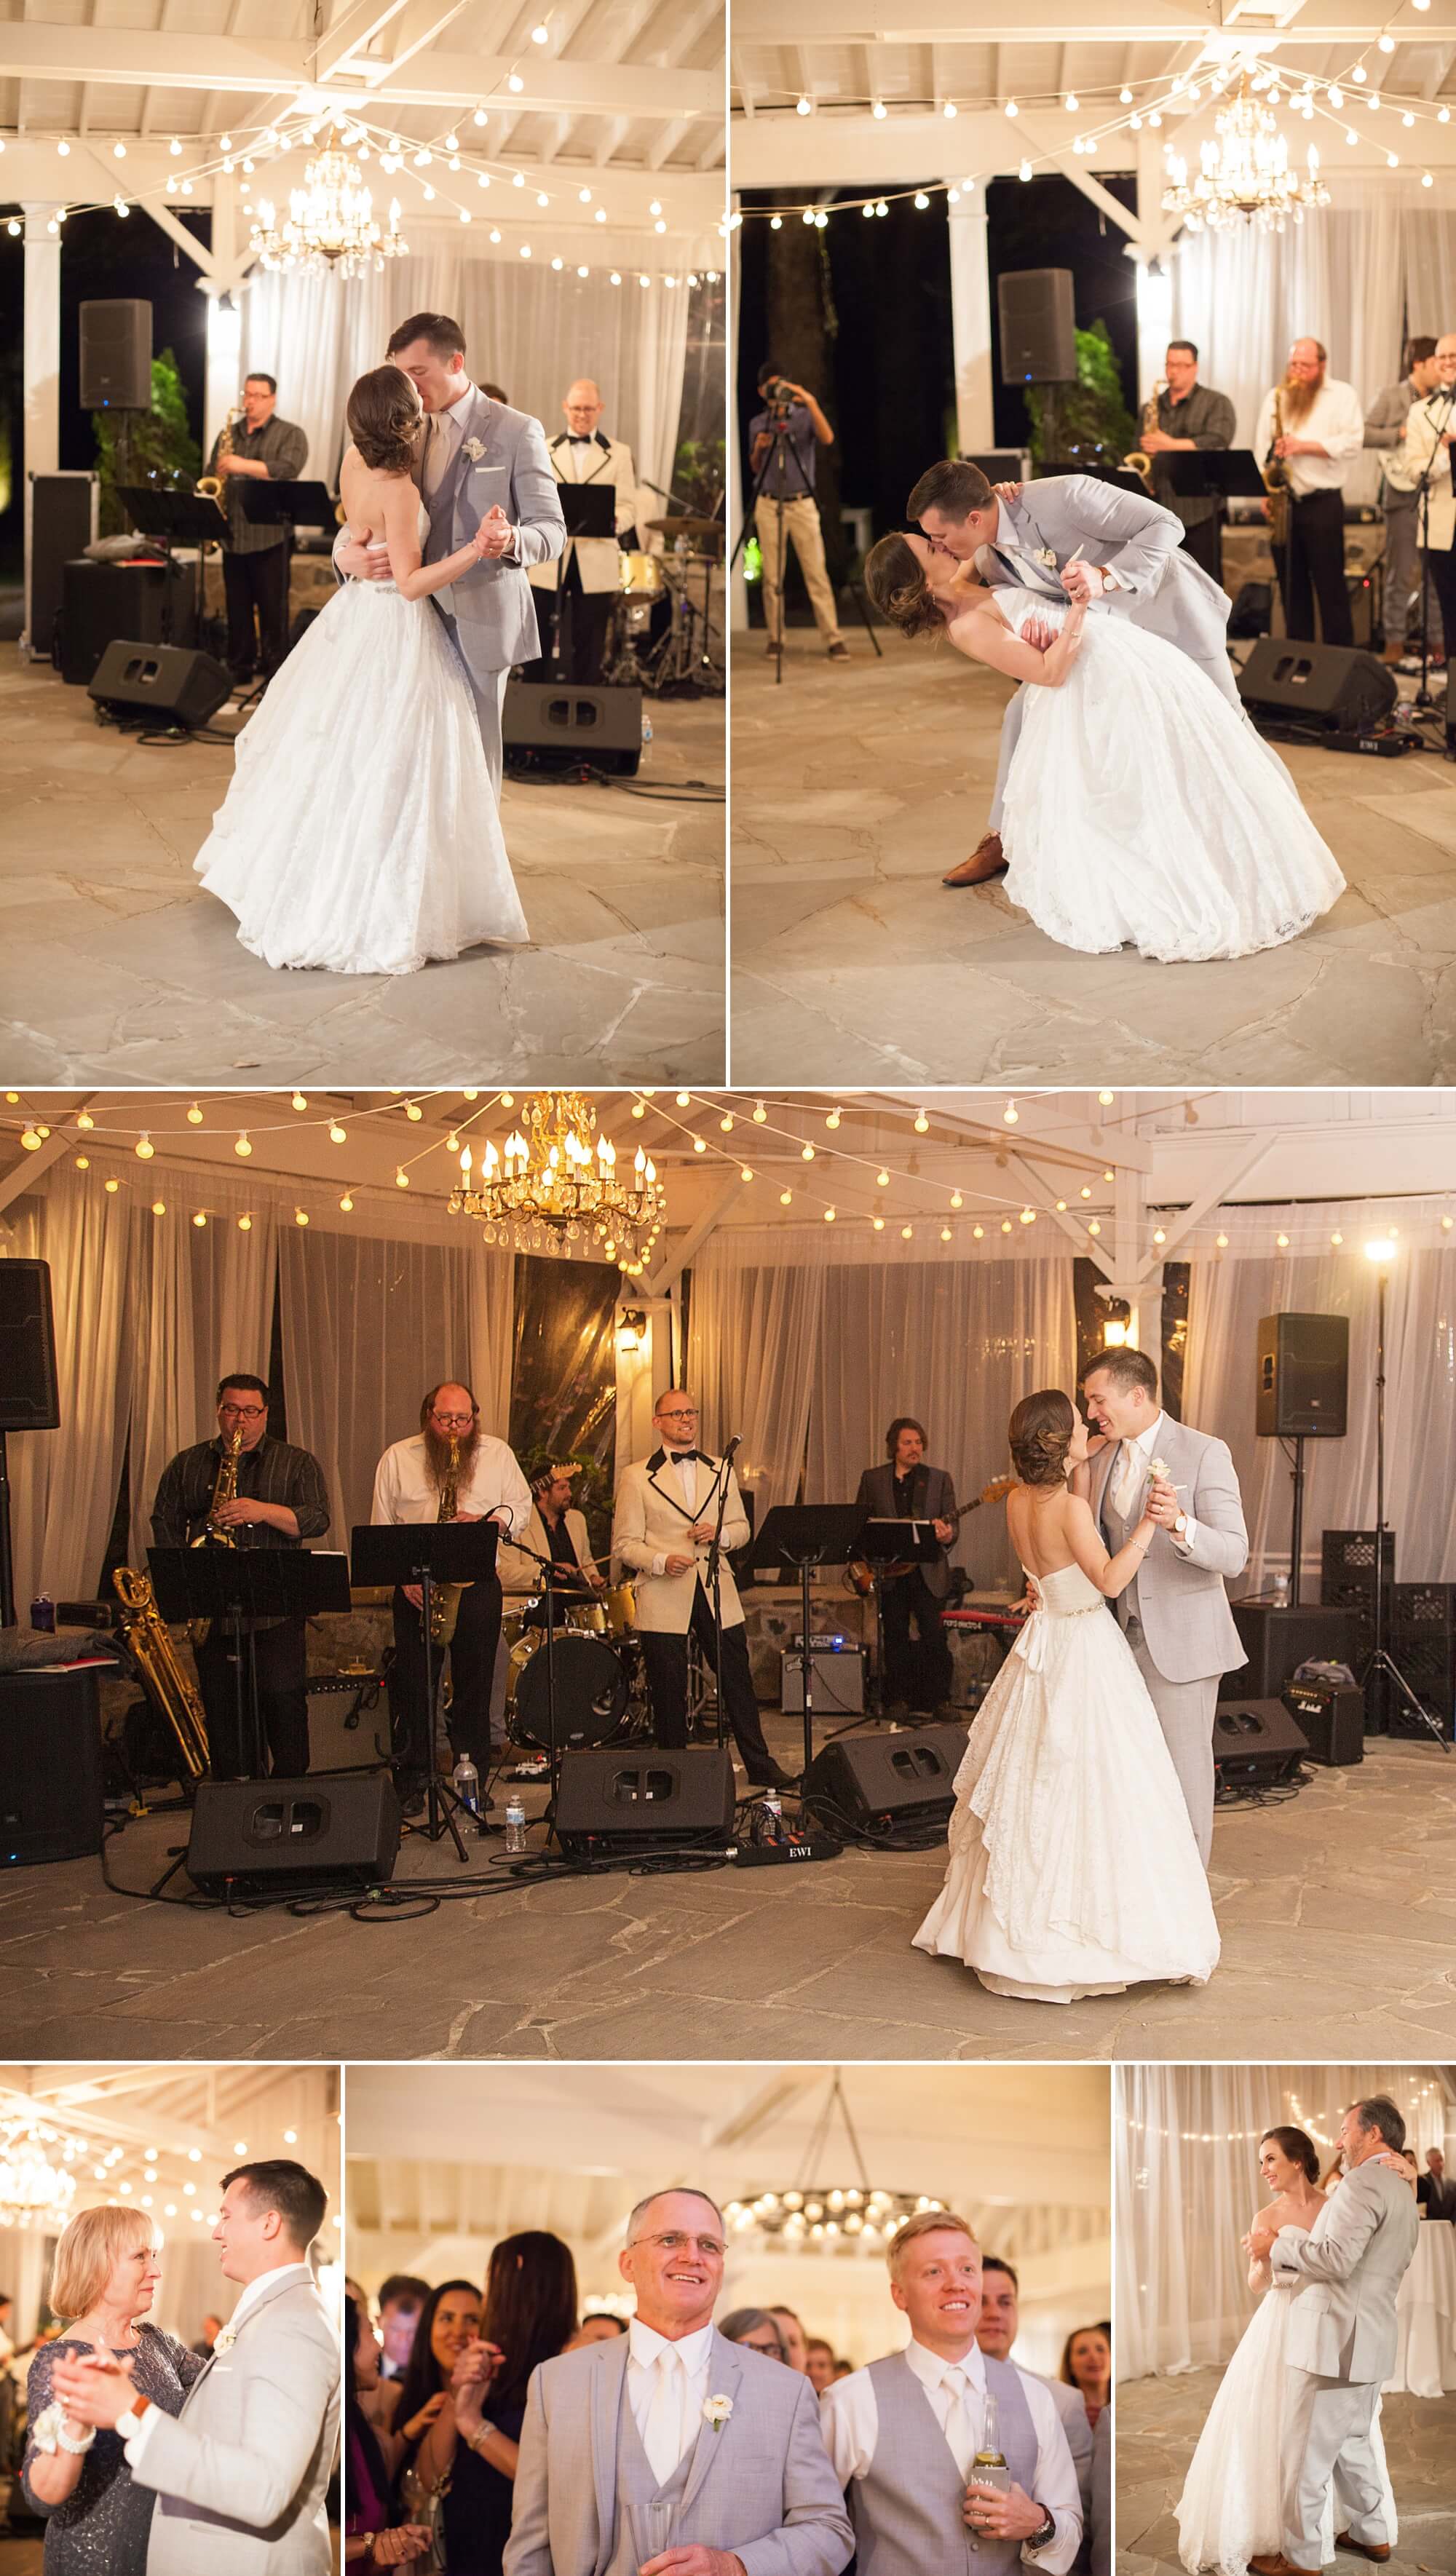 Bride and groom share first dances in front of the band. Spring wedding at Cedarwood Weddings in Nashville, TN. Photo by Krista Lee Photography, from Sam and Izzy's wedding day.